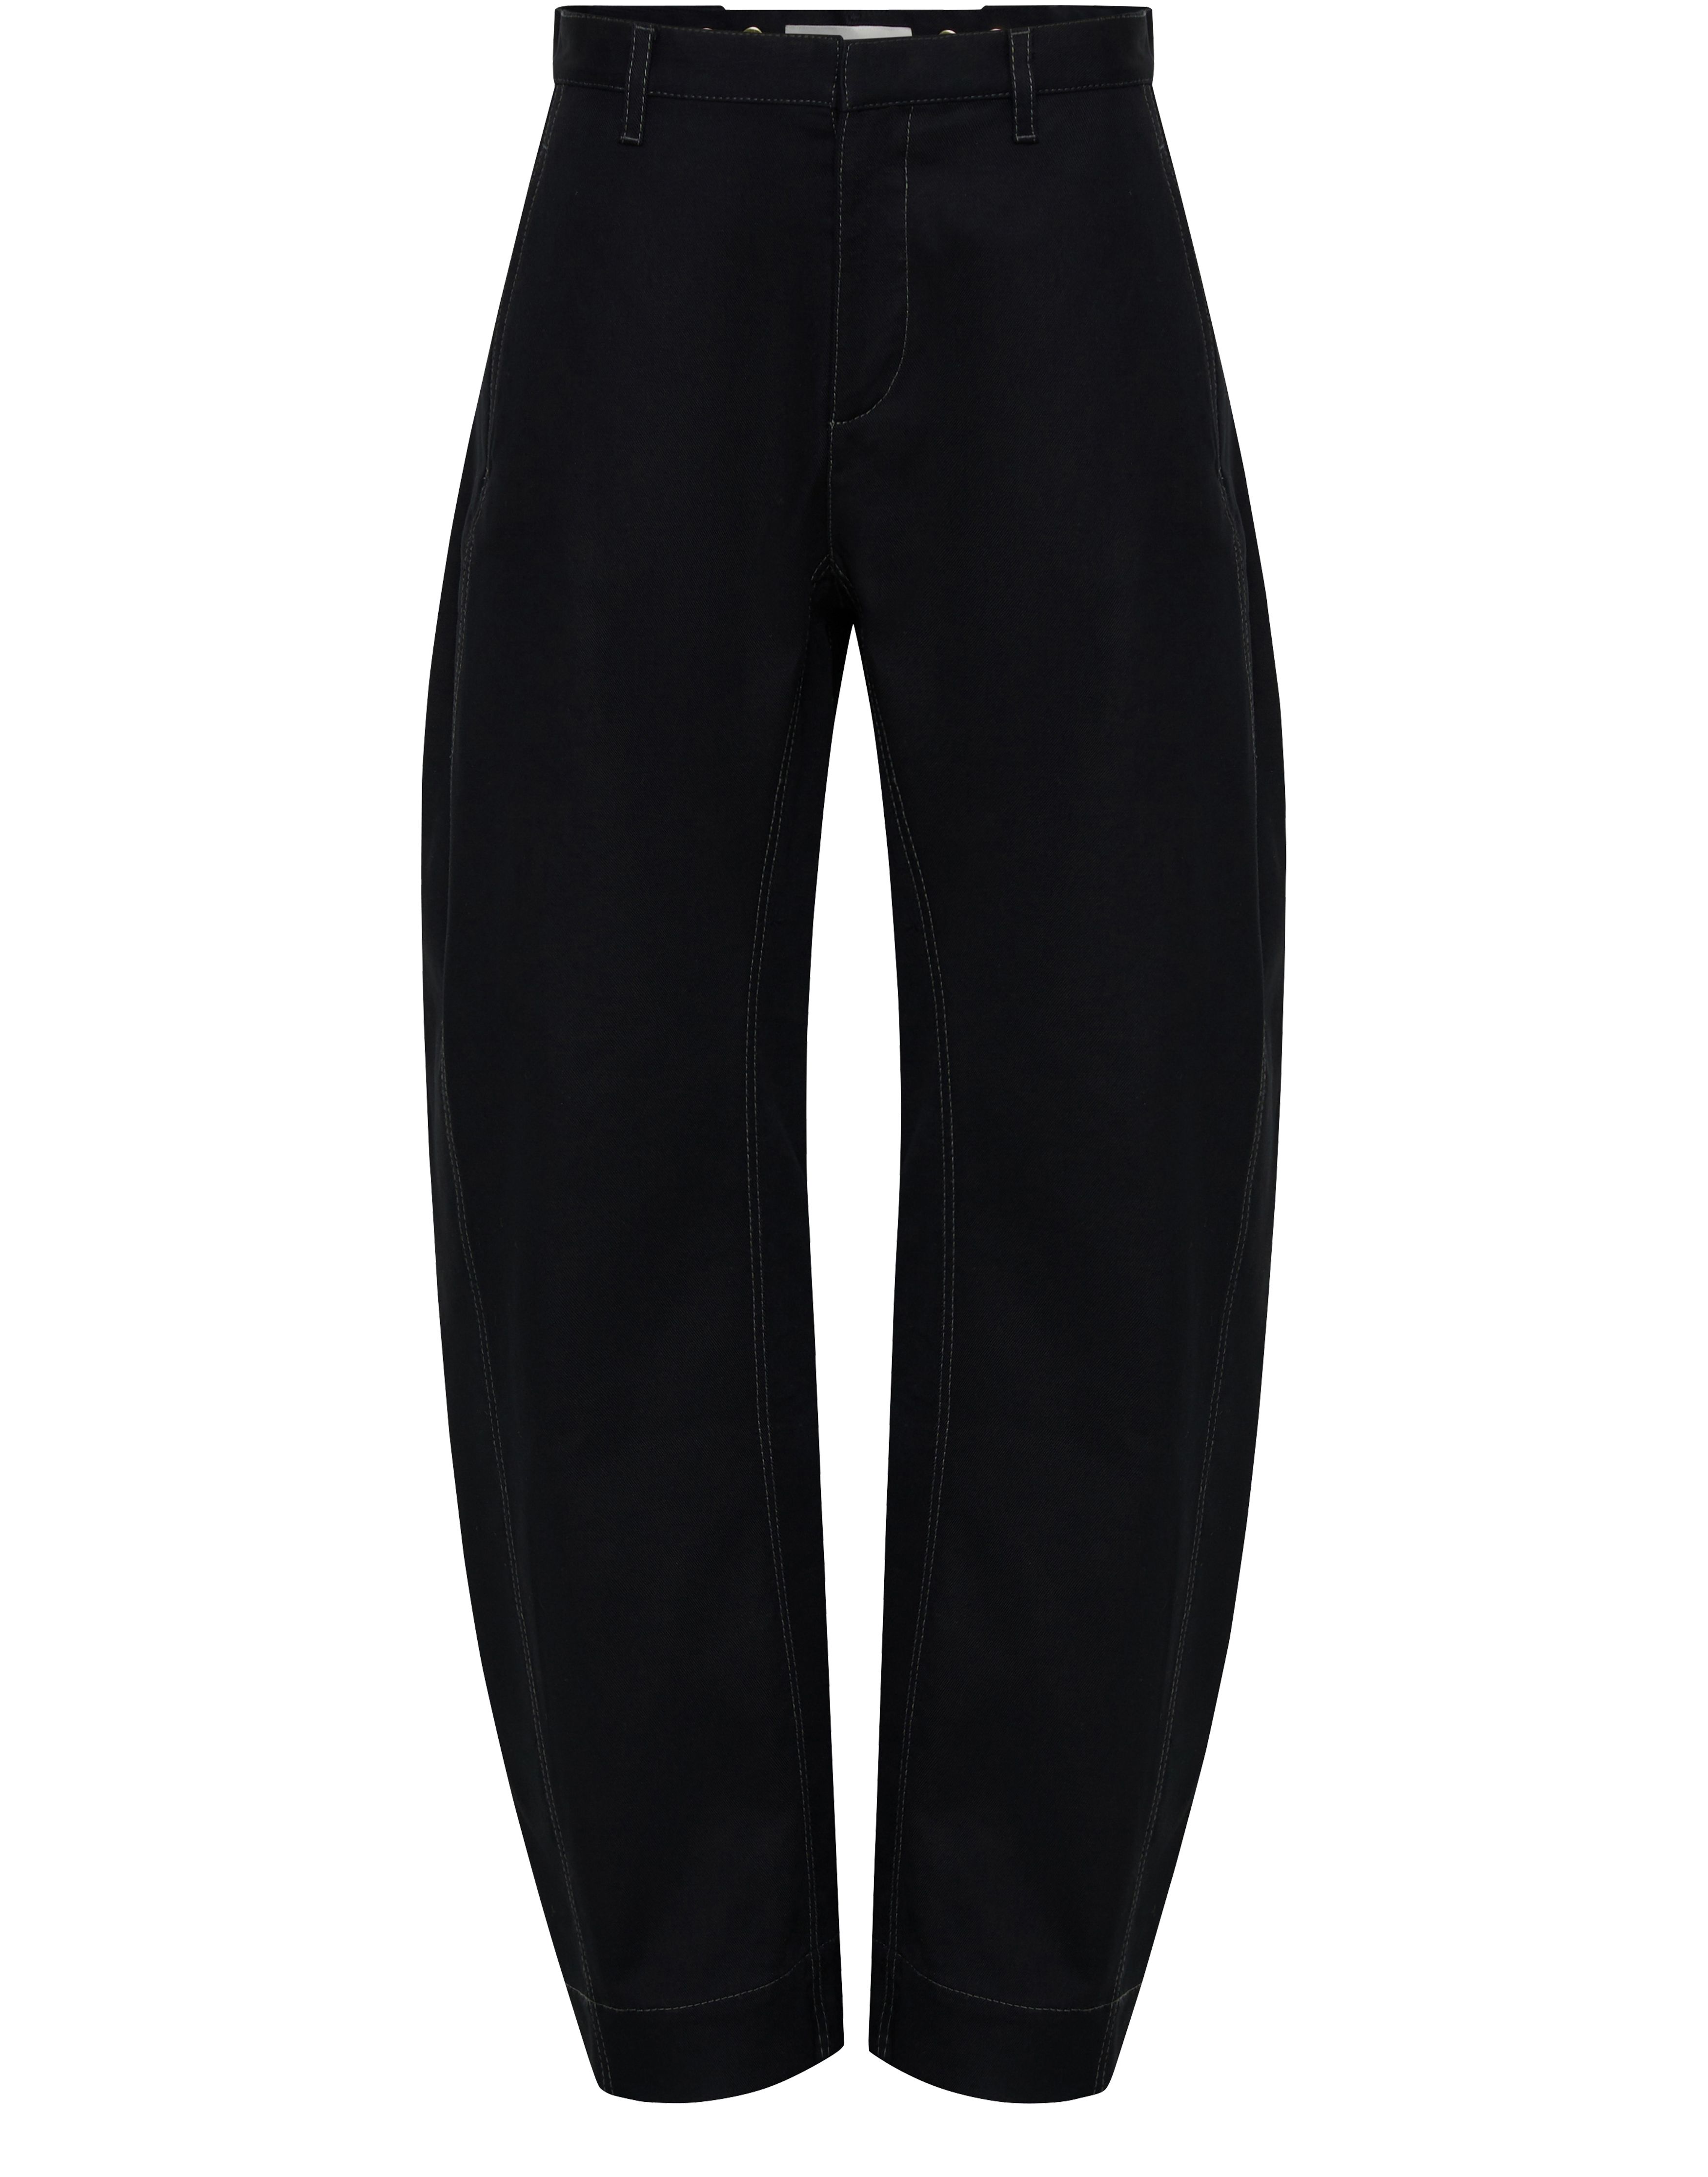 Dion Lee Arch Panel pant.